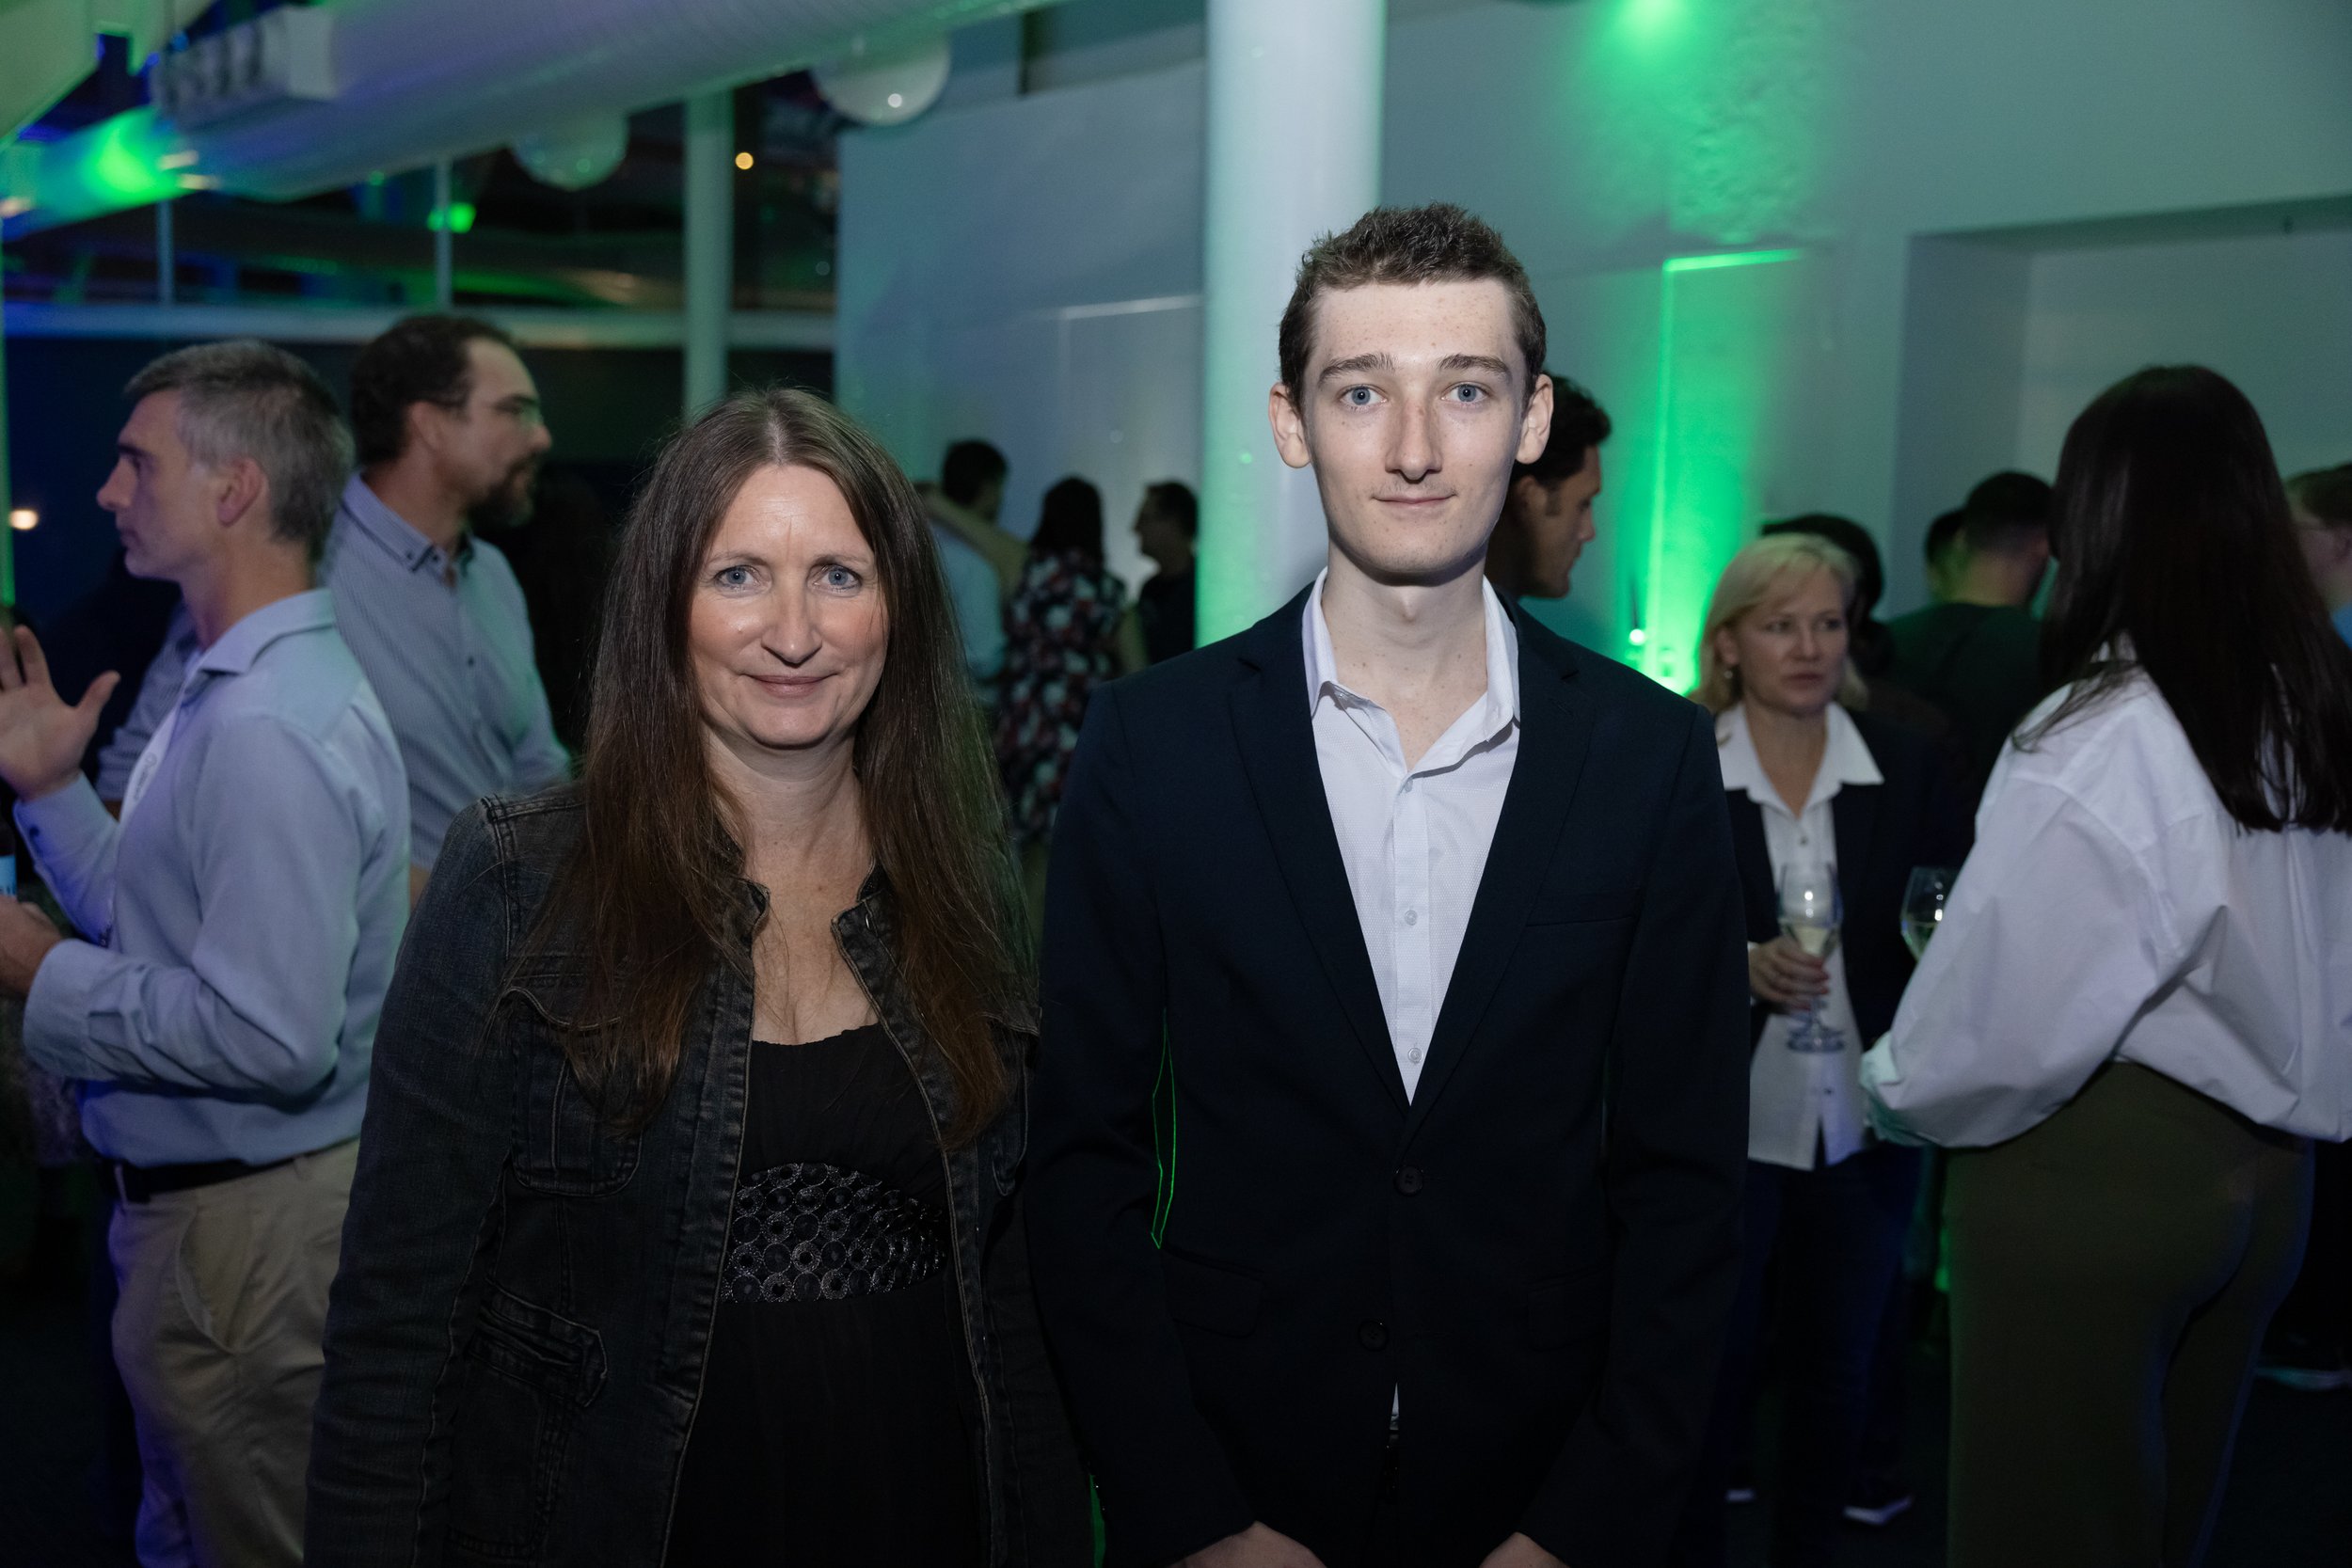 Green Energy Trading 10 years cocktail party-55.jpg